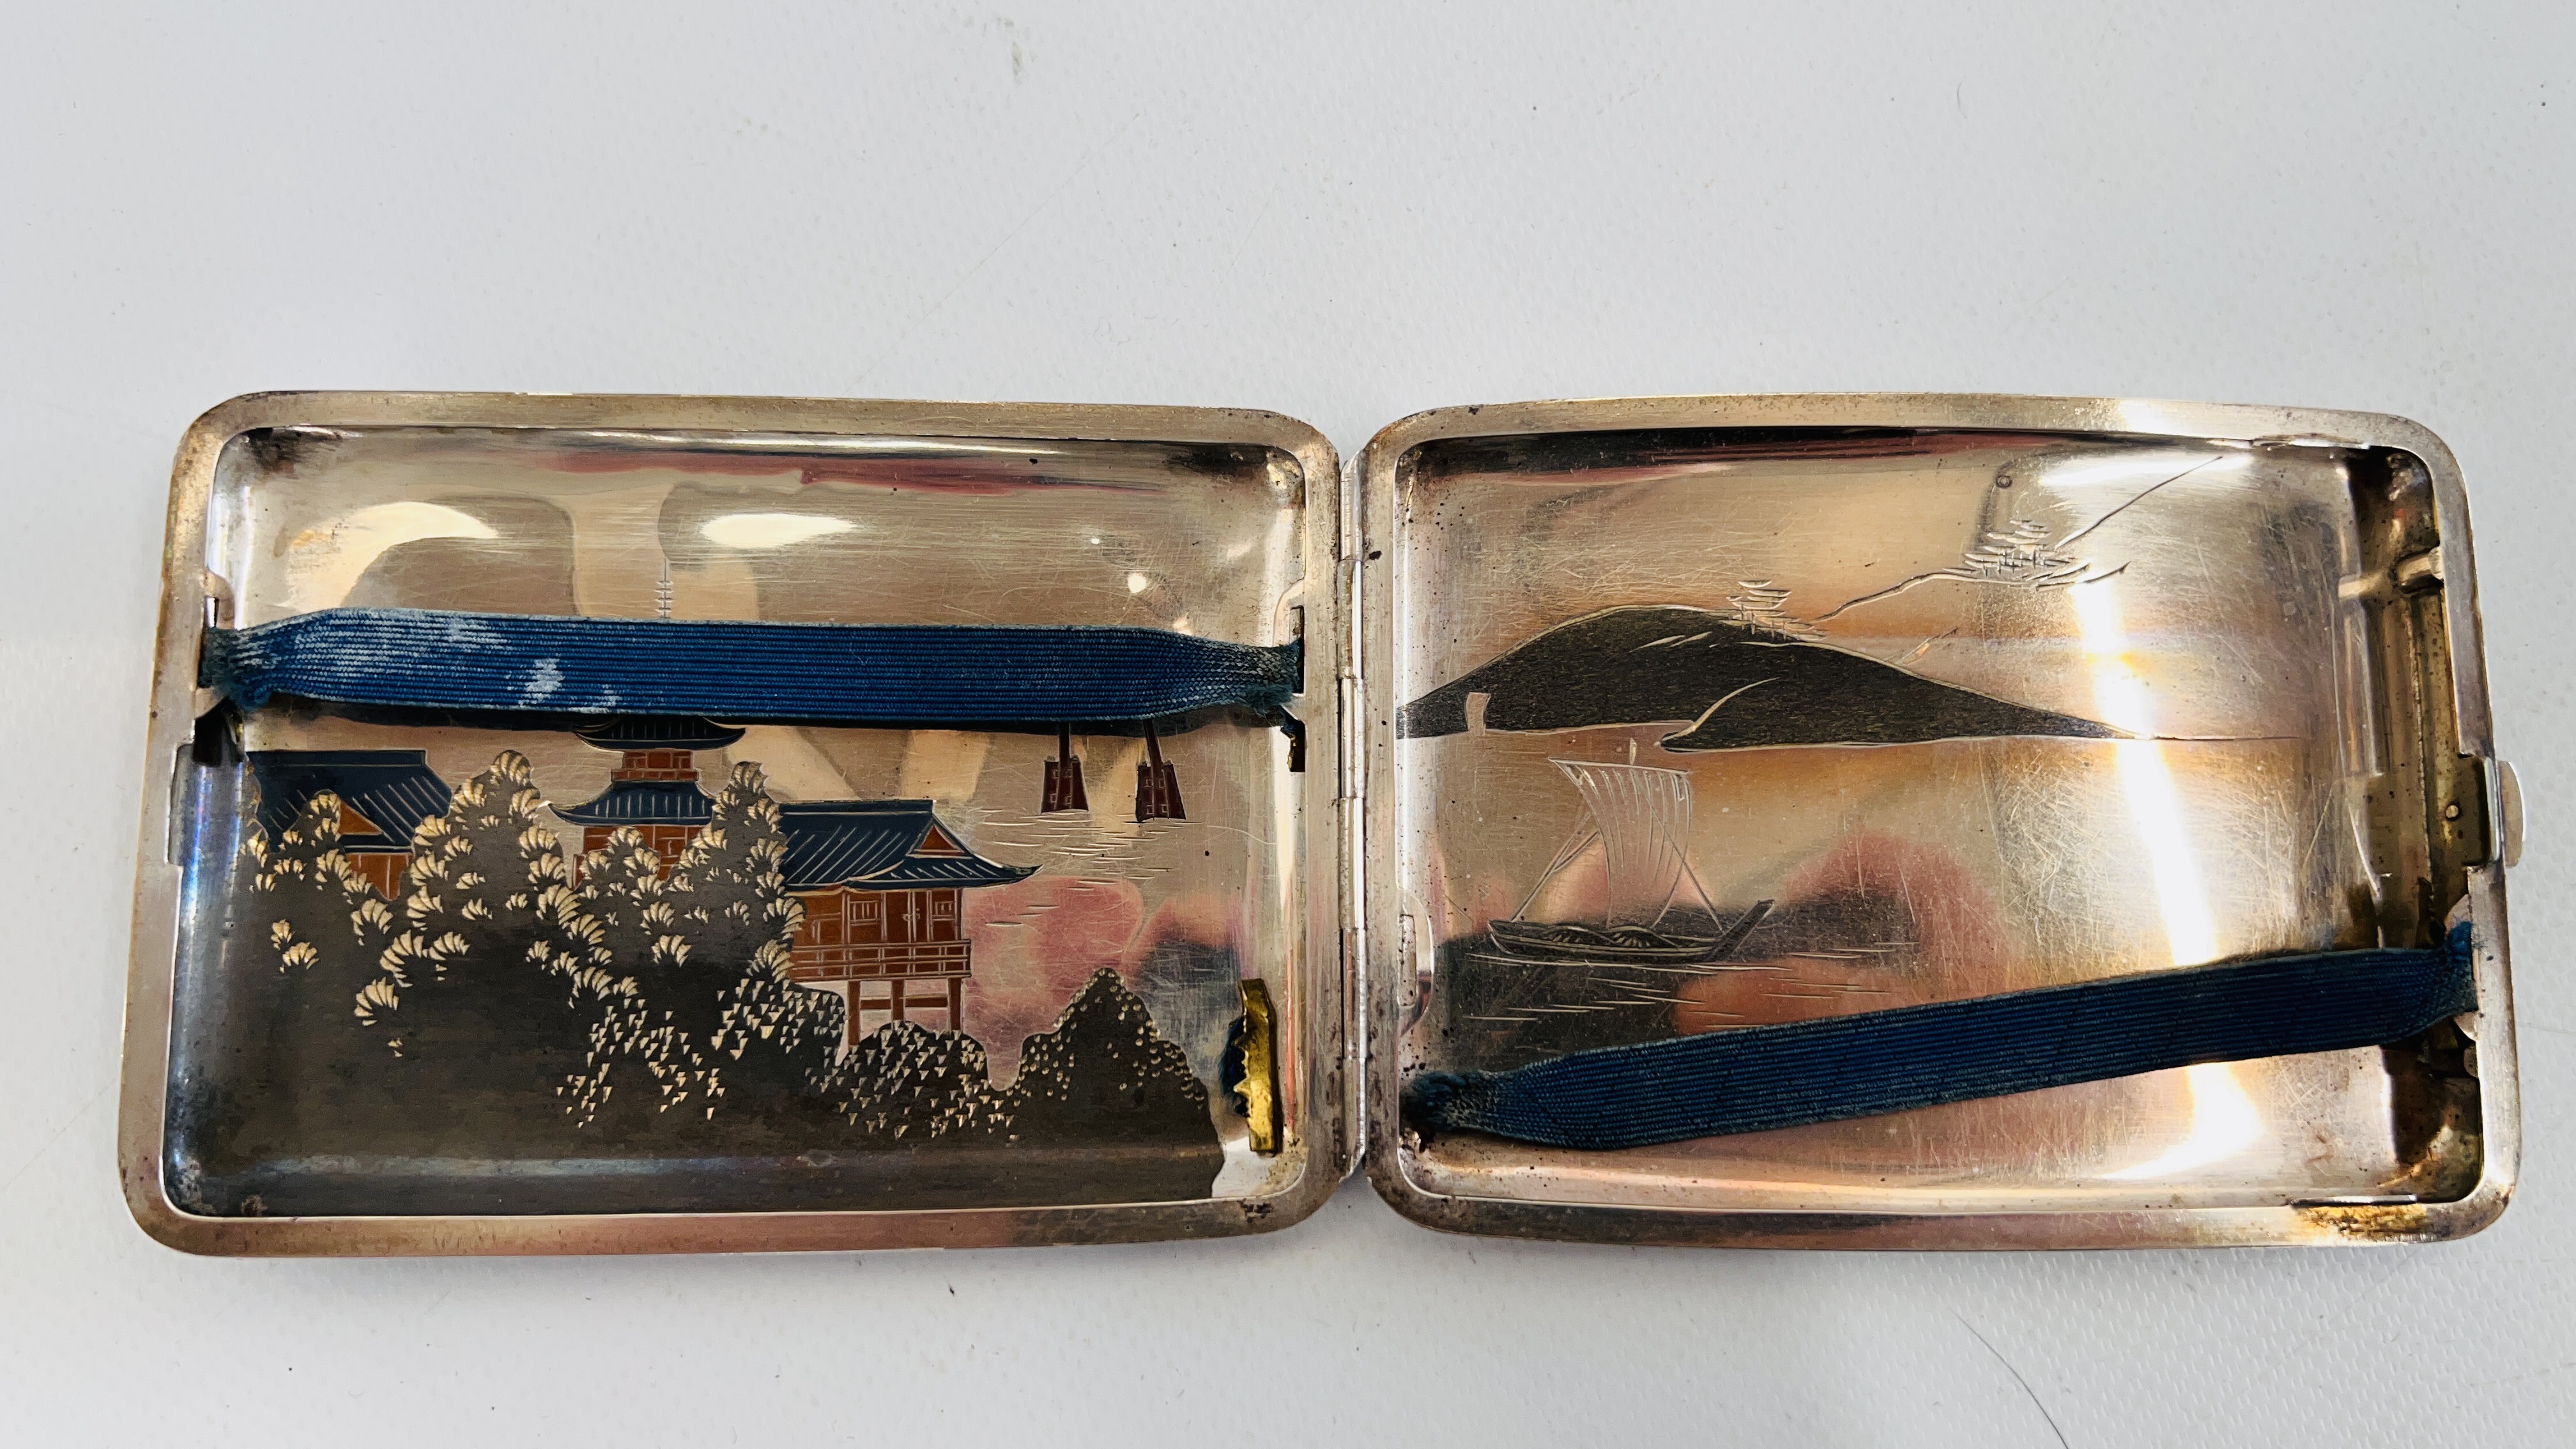 A JAPANESE STYLE SILVER AND MIXED METAL CIGARETTE CASE. L 11.5CM. X H 8CM. - Image 4 of 5